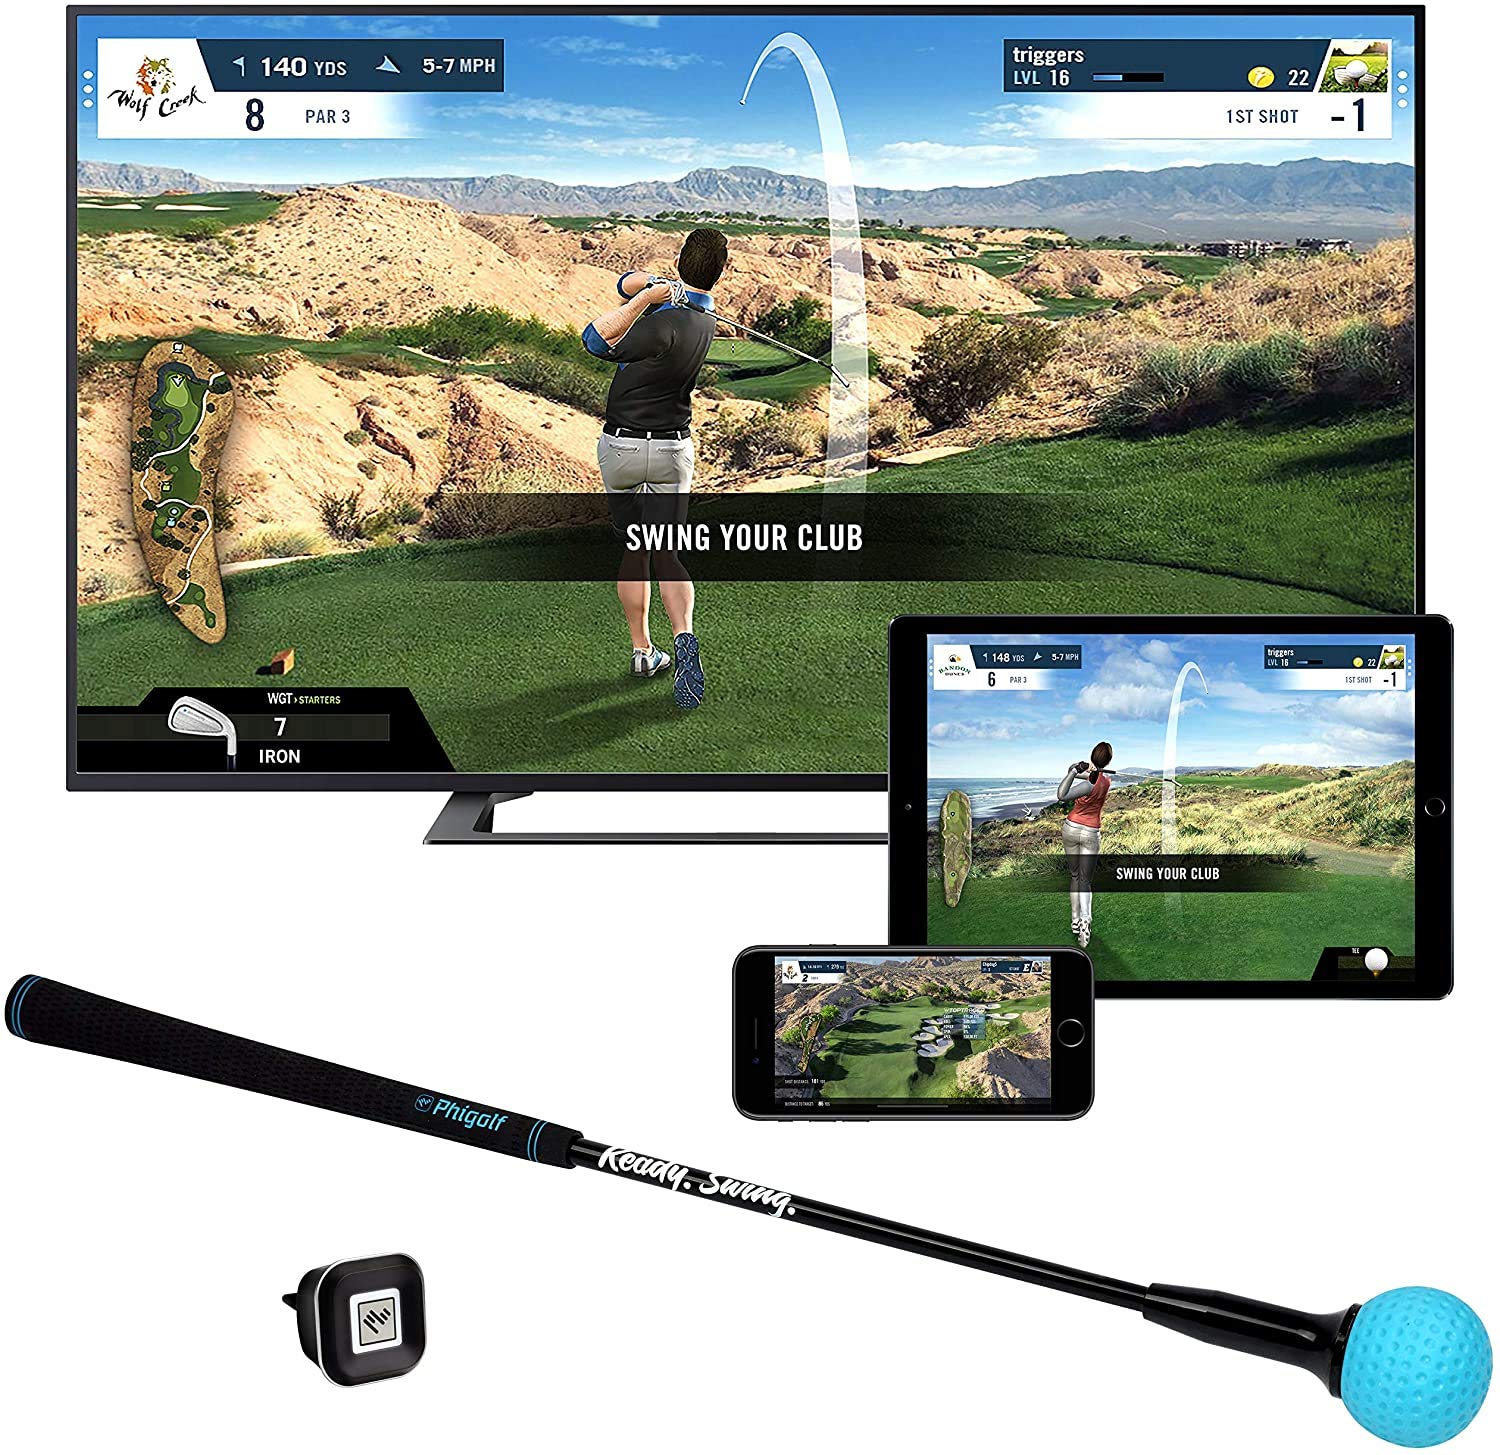 PHIGOLF Phigolf2 Golf Simulator with Swing Stick for Indoor & Outdoor Use,  Golf Swing Trainer with Upgraded Motion Sensor & 3D Swing Analysis